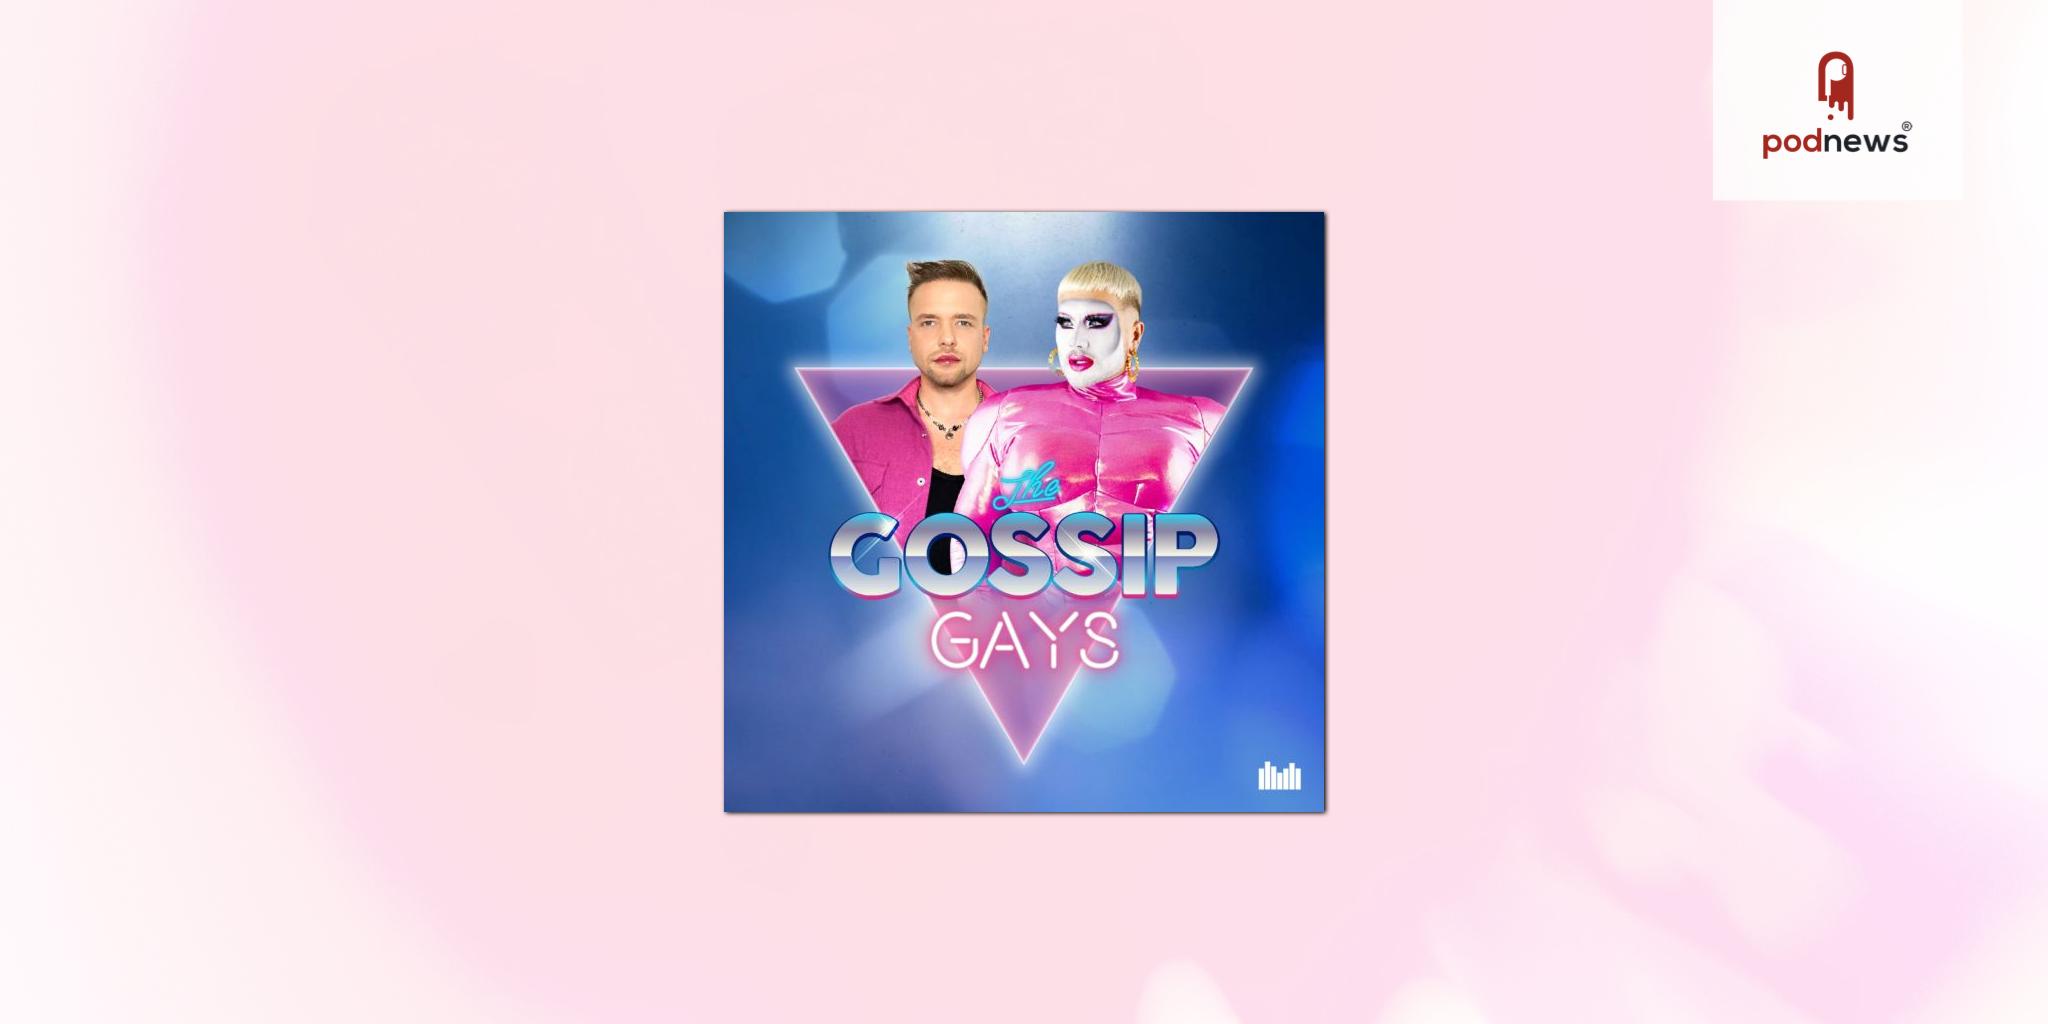 Audio Always and The Gossip Gays podcast celebrates Pride Month with media partnership first